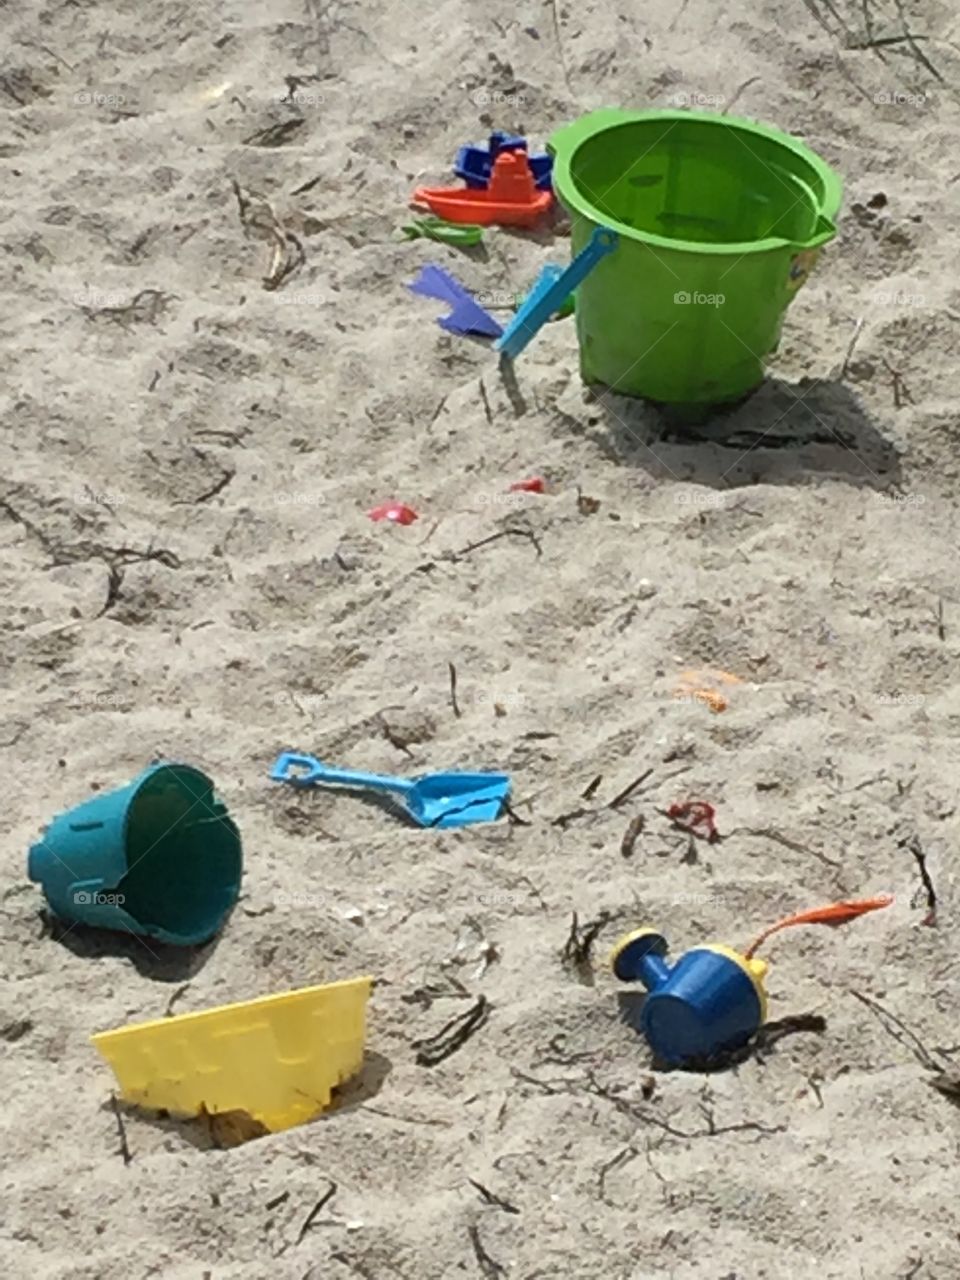 Children's toys at the beach